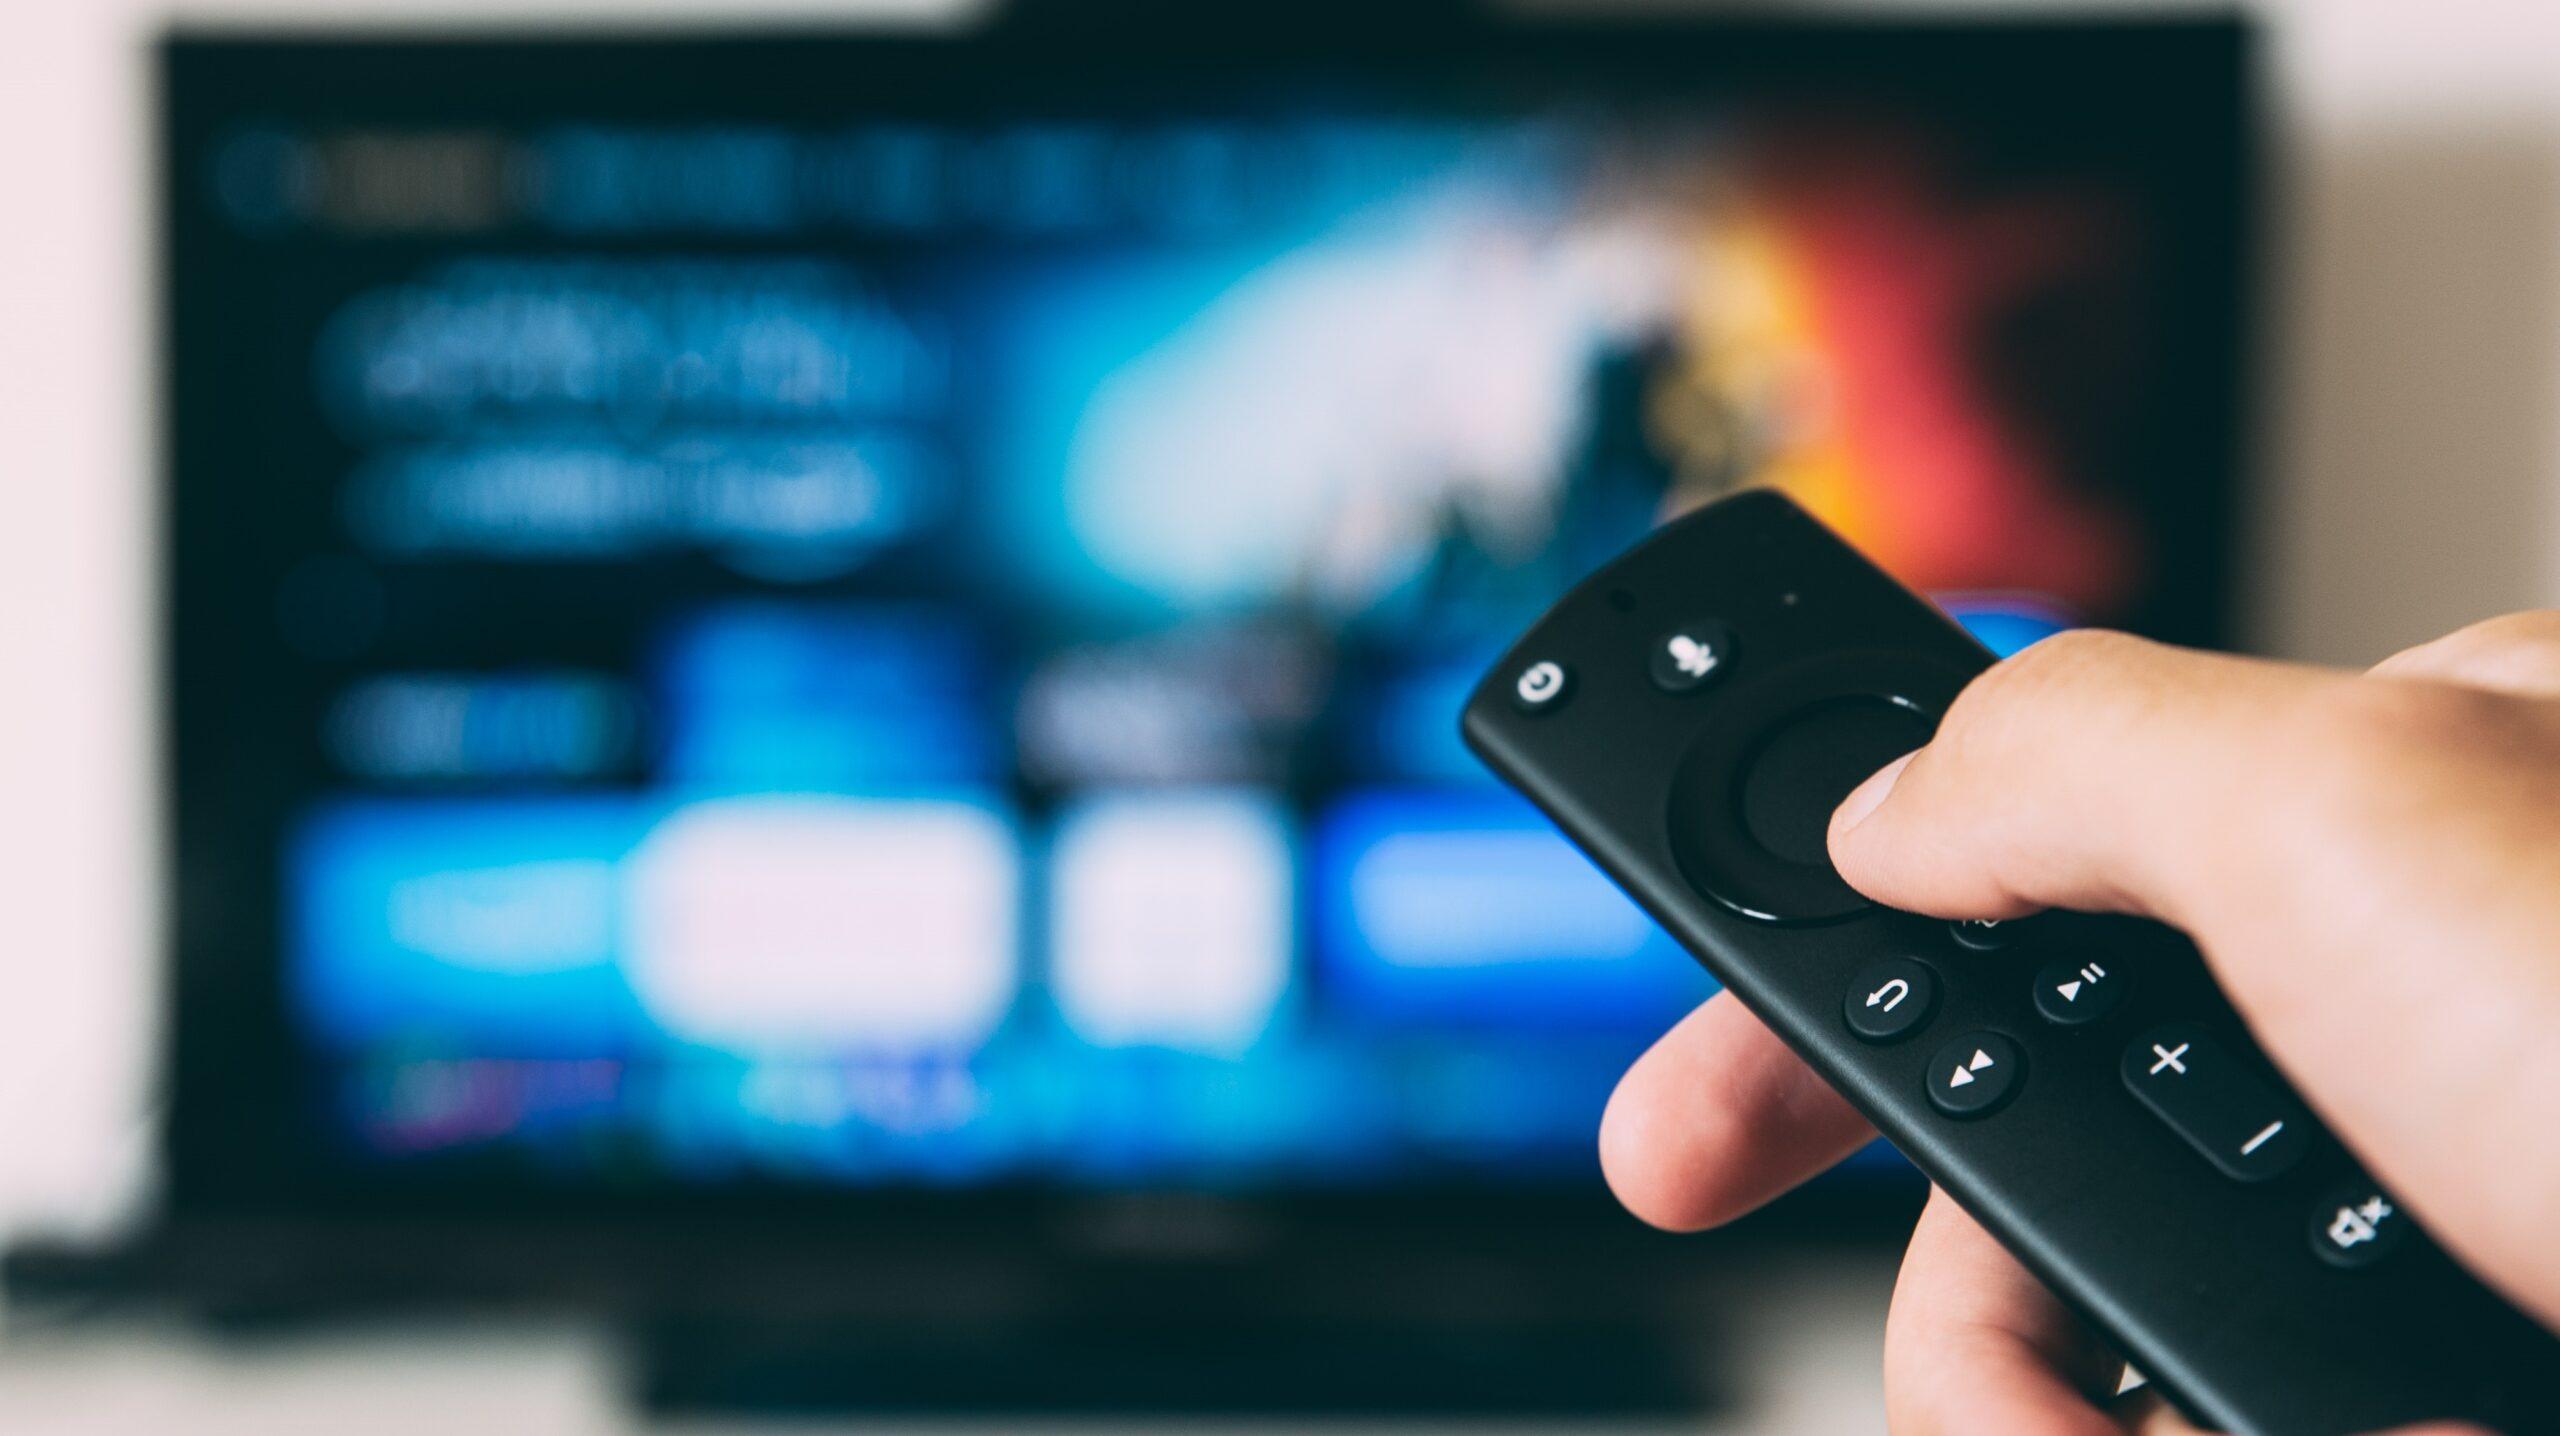 Close up of someone's hand holding a television remote control with a blurred television in the background.